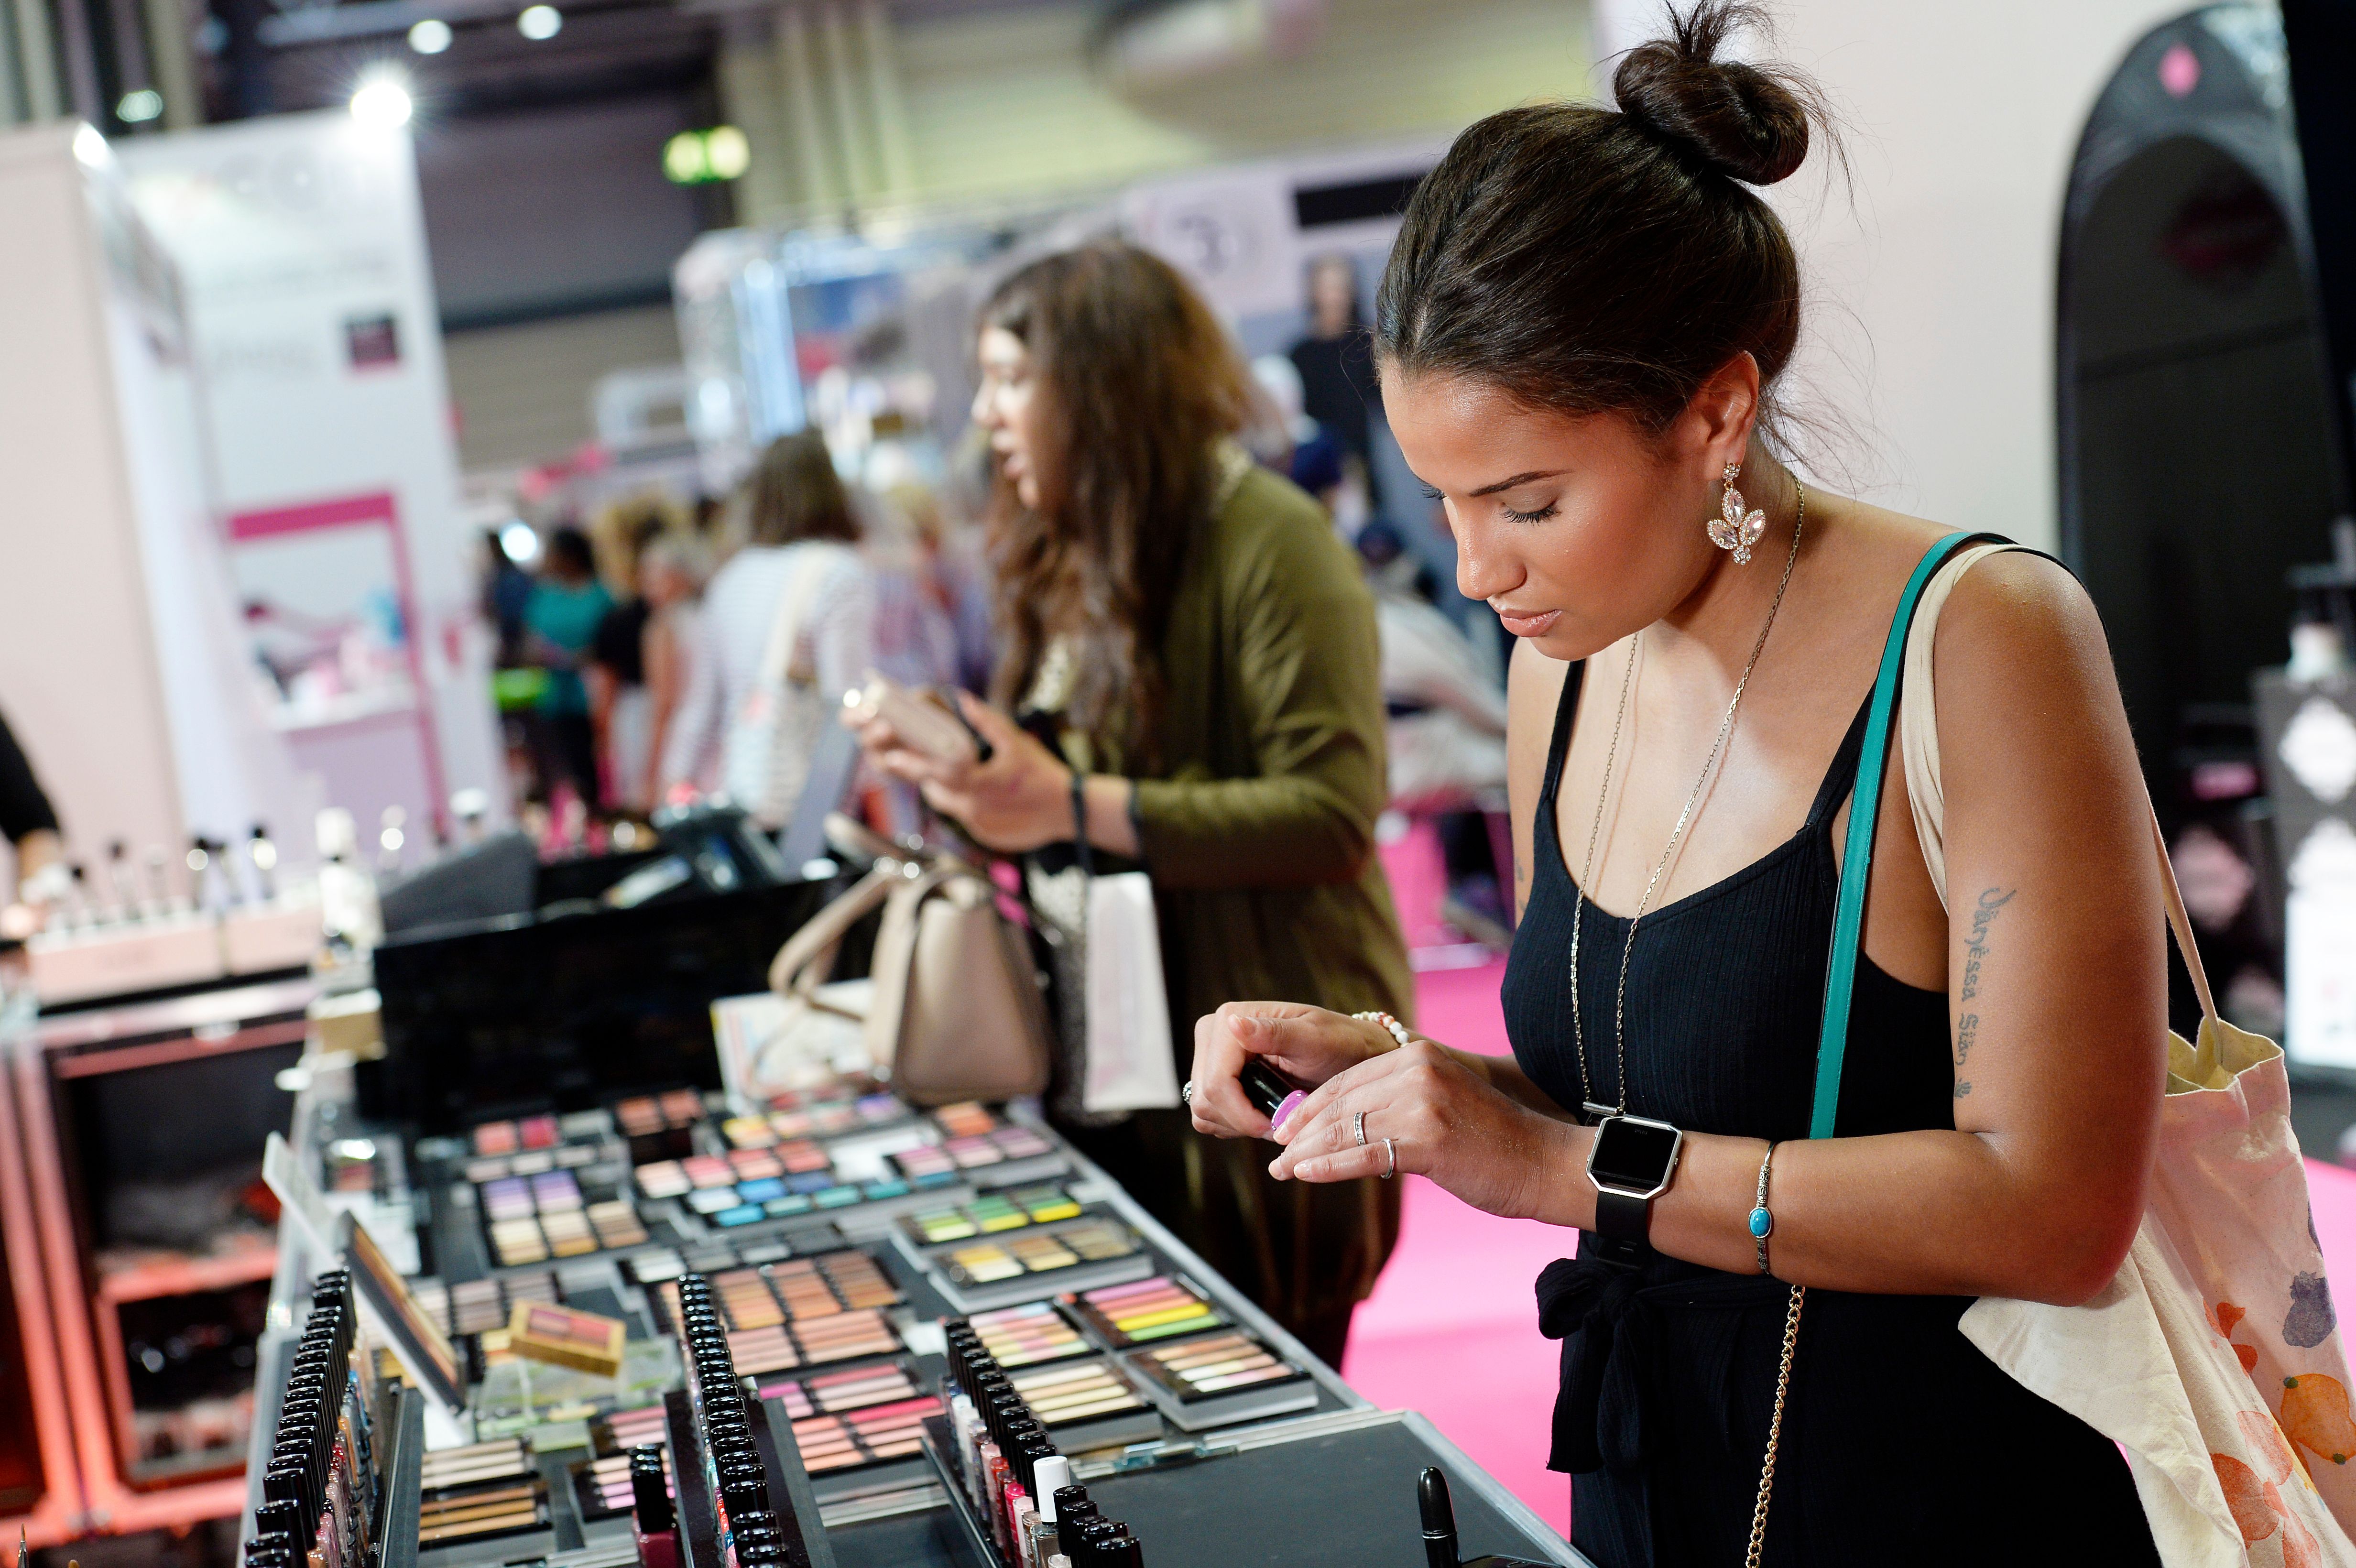 The Biggest Beauty and Shopping Event of the Year